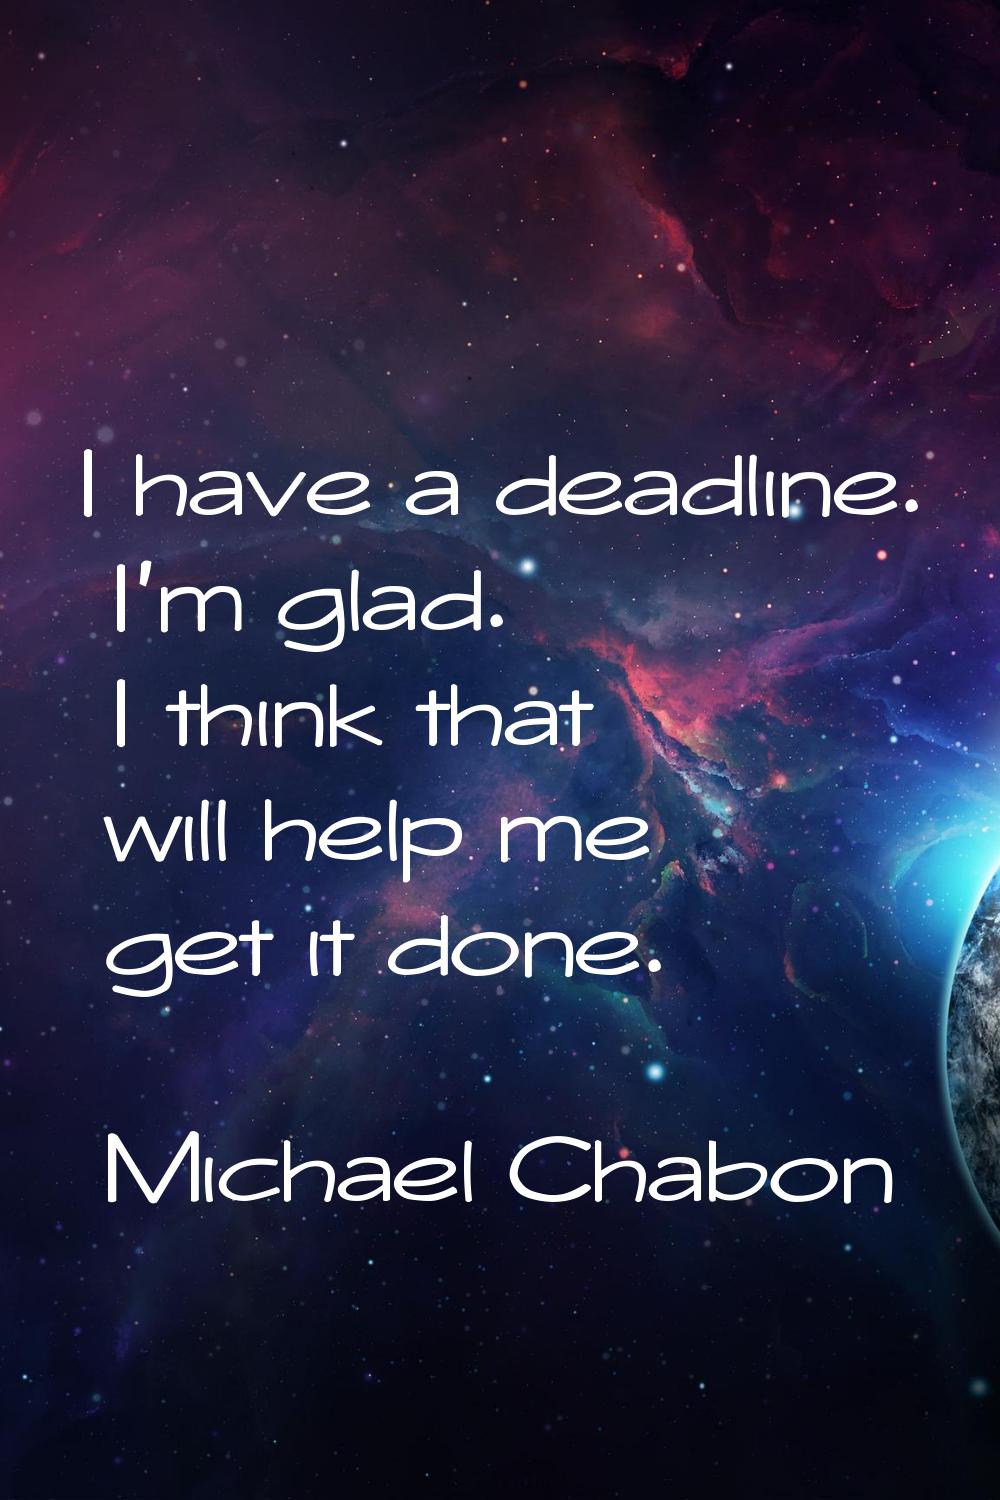 I have a deadline. I'm glad. I think that will help me get it done.